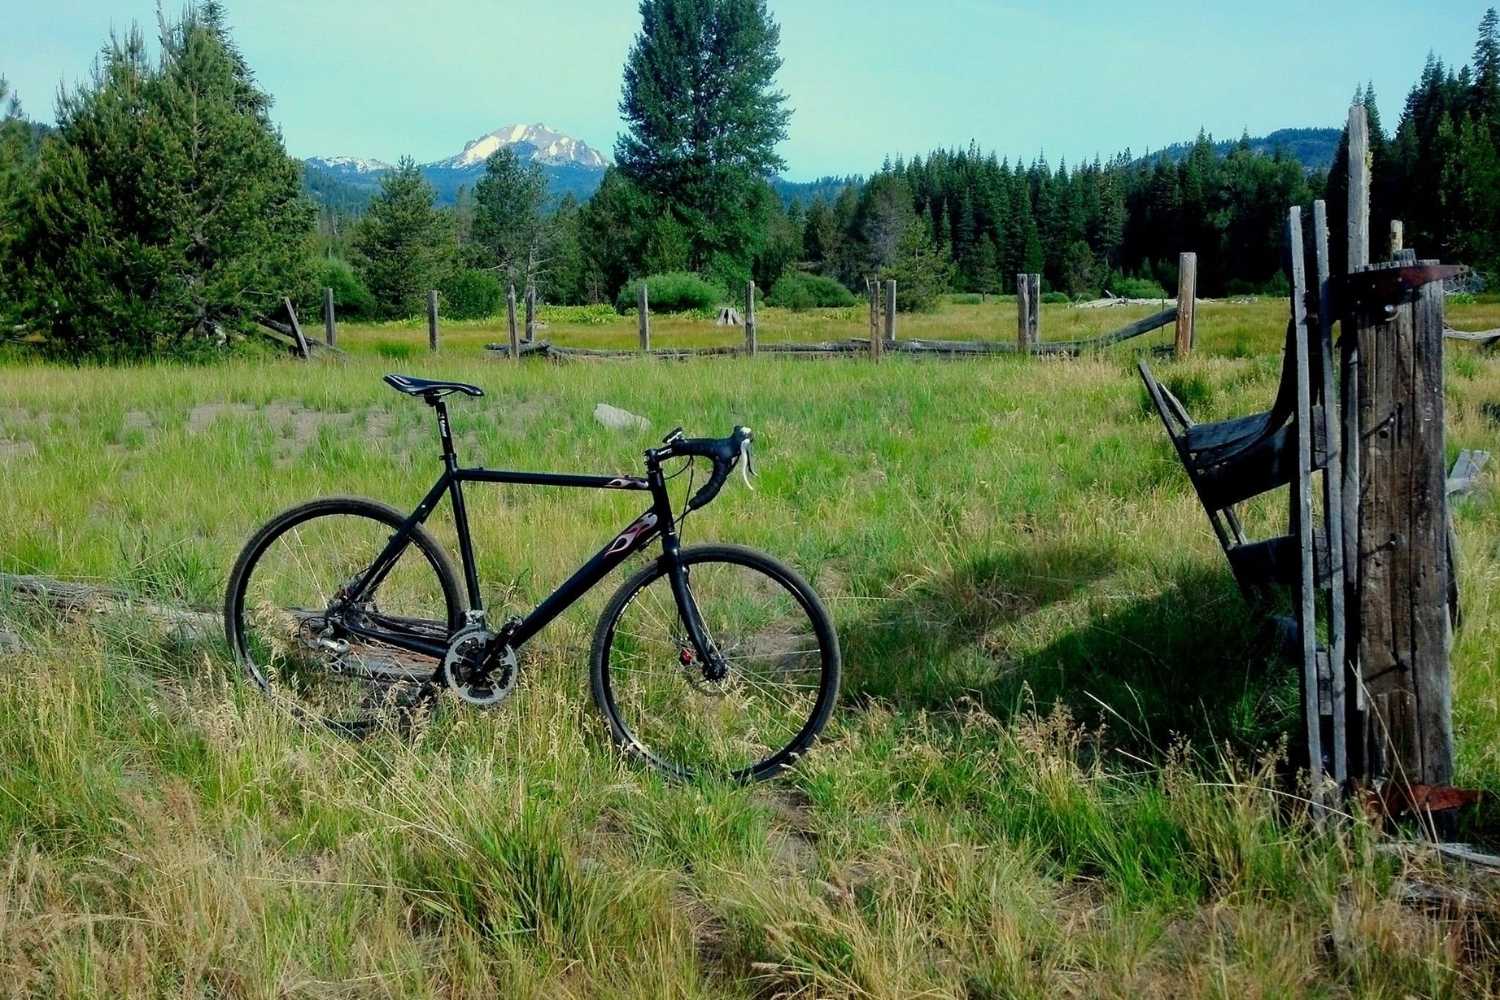 Bike leaning against fence with meadow and lassen peak in background View can be seen on the Mile High Bike Ride